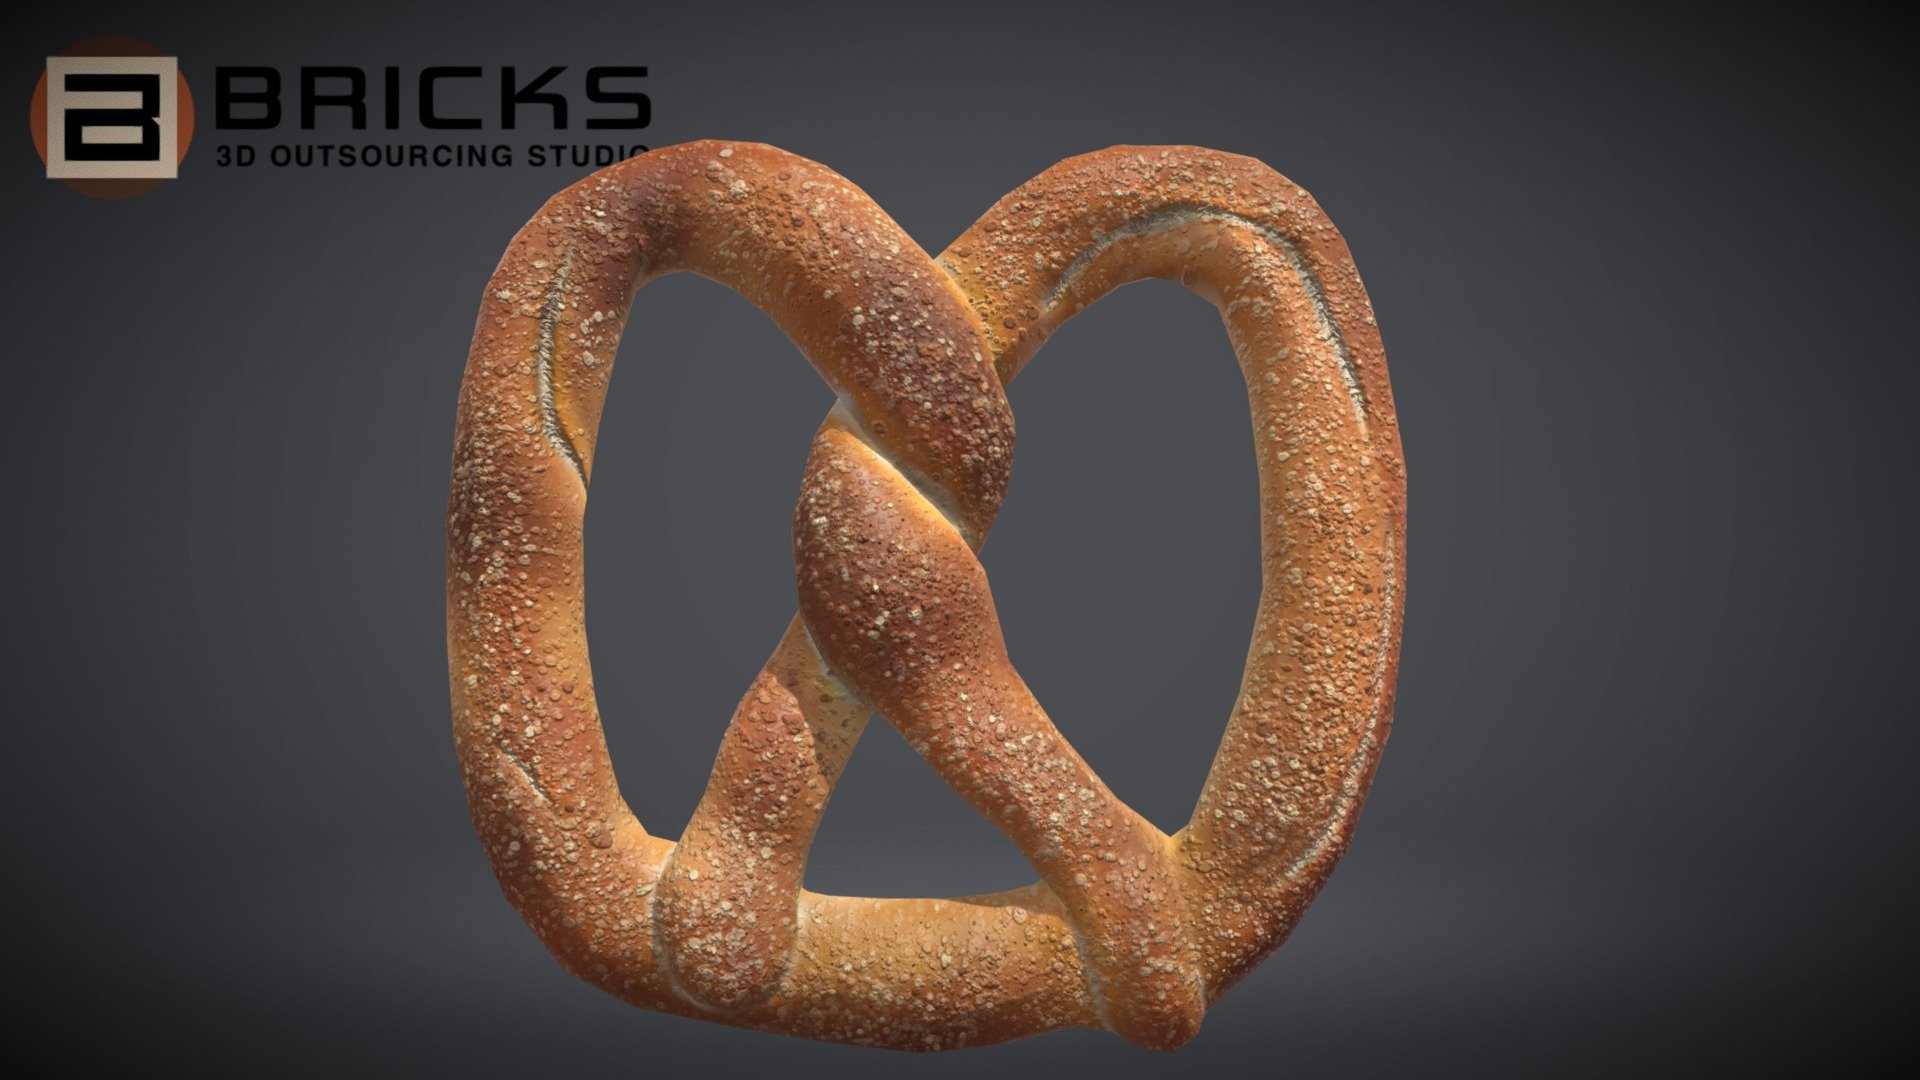 PBR Food Asset:
Pretzel
Polycount: 1426
Vertex count: 846
Texture Size: 2048px x 2048px
Normal: OpenGL

If you need any adjust in file please contact us: team@bricks3dstudio.com

Hire us: tringuyen@bricks3dstudio.com
Here is us: https://www.bricks3dstudio.com/
        https://www.artstation.com/bricksstudio
        https://www.facebook.com/Bricks3dstudio/
        https://www.linkedin.com/in/bricks-studio-b10462252/ - Pretzel - Buy Royalty Free 3D model by Bricks Studio (@bricks3dstudio) 3d model